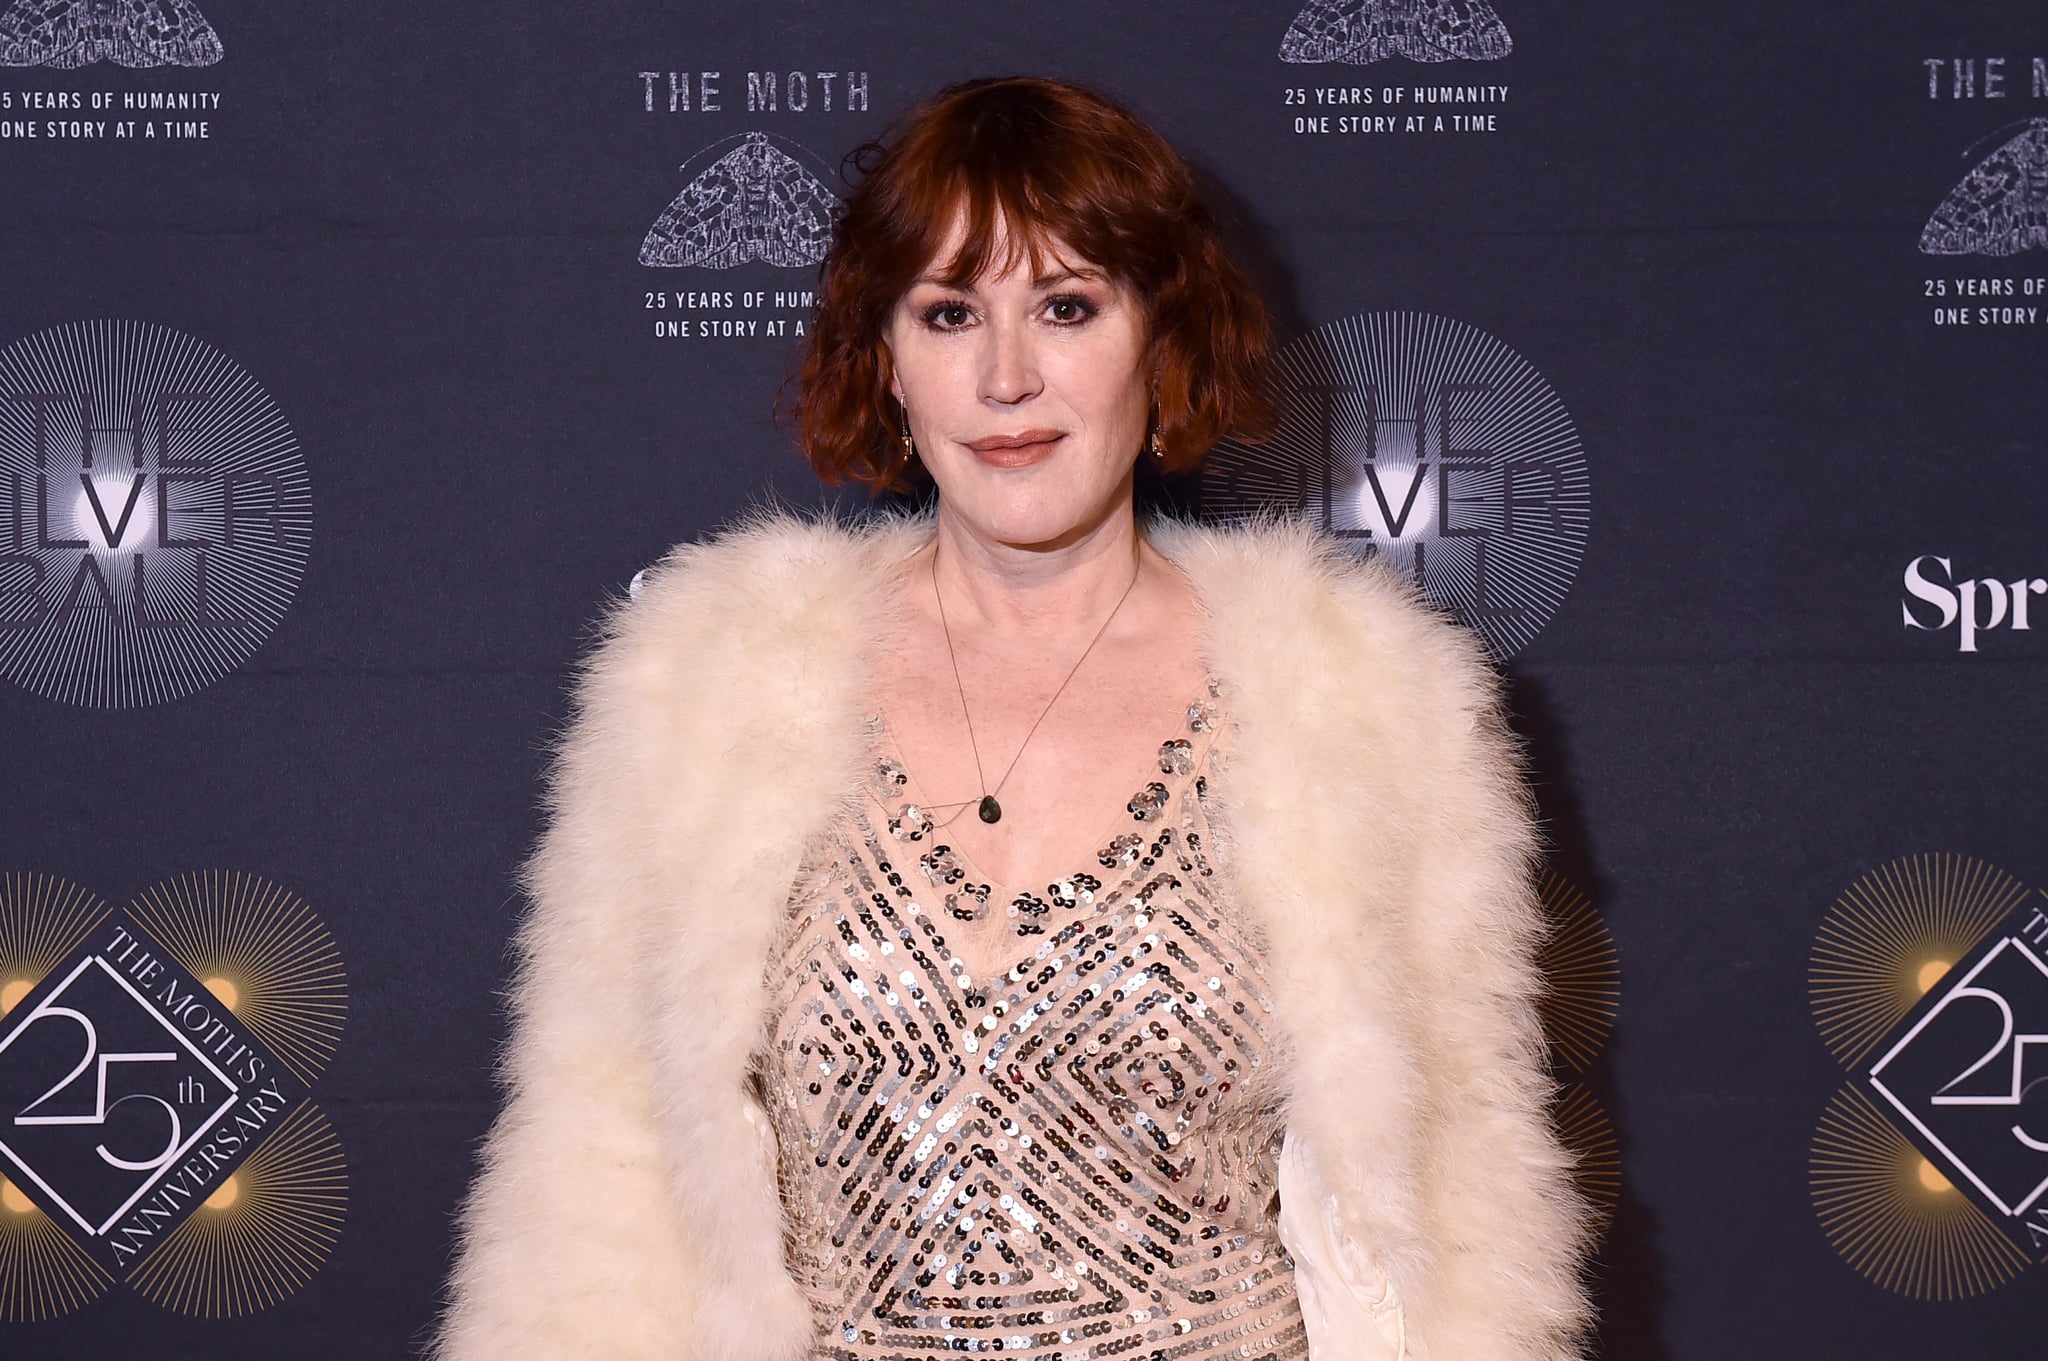 NEW YORK, NEW YORK - MAY 26: Molly Ringwald attends the Silver Ball: The Moth 25th Anniversary Gala Honoring David Byrne at Spring Studios on May 26, 2022 in New York City.  (Photo by Ilya S. Savenok/Getty Images for The Moth)